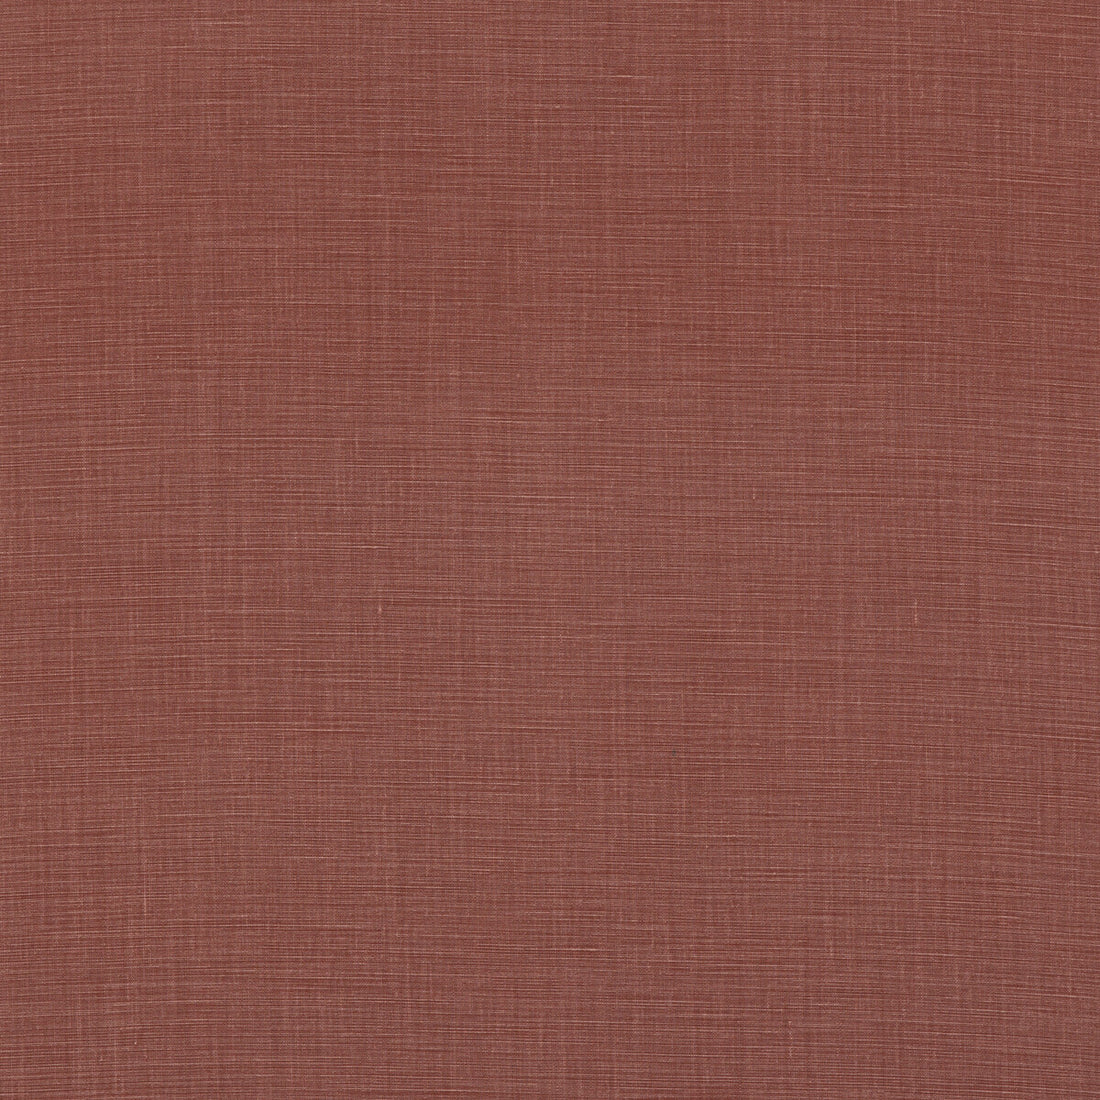 Baker House Linen fabric in tuscan color - pattern BF10961.320.0 - by G P &amp; J Baker in the Baker House Linens collection